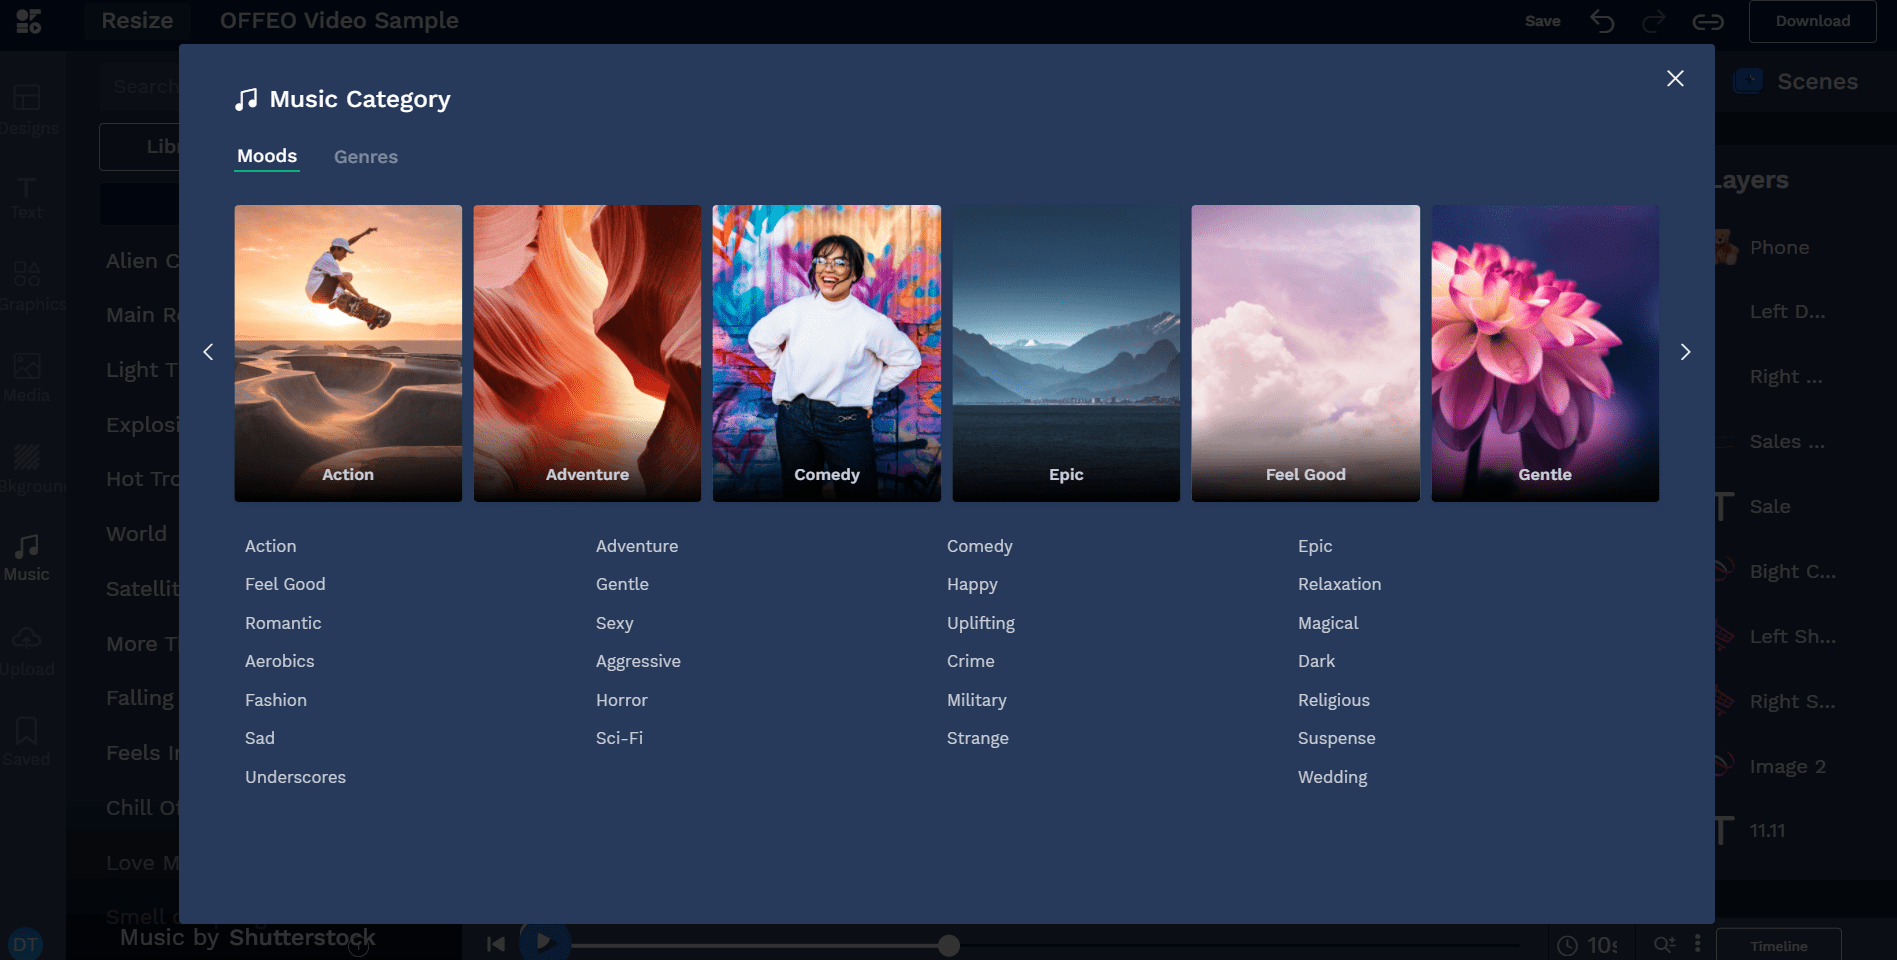 Offeo has a decent library of music to use in your ads